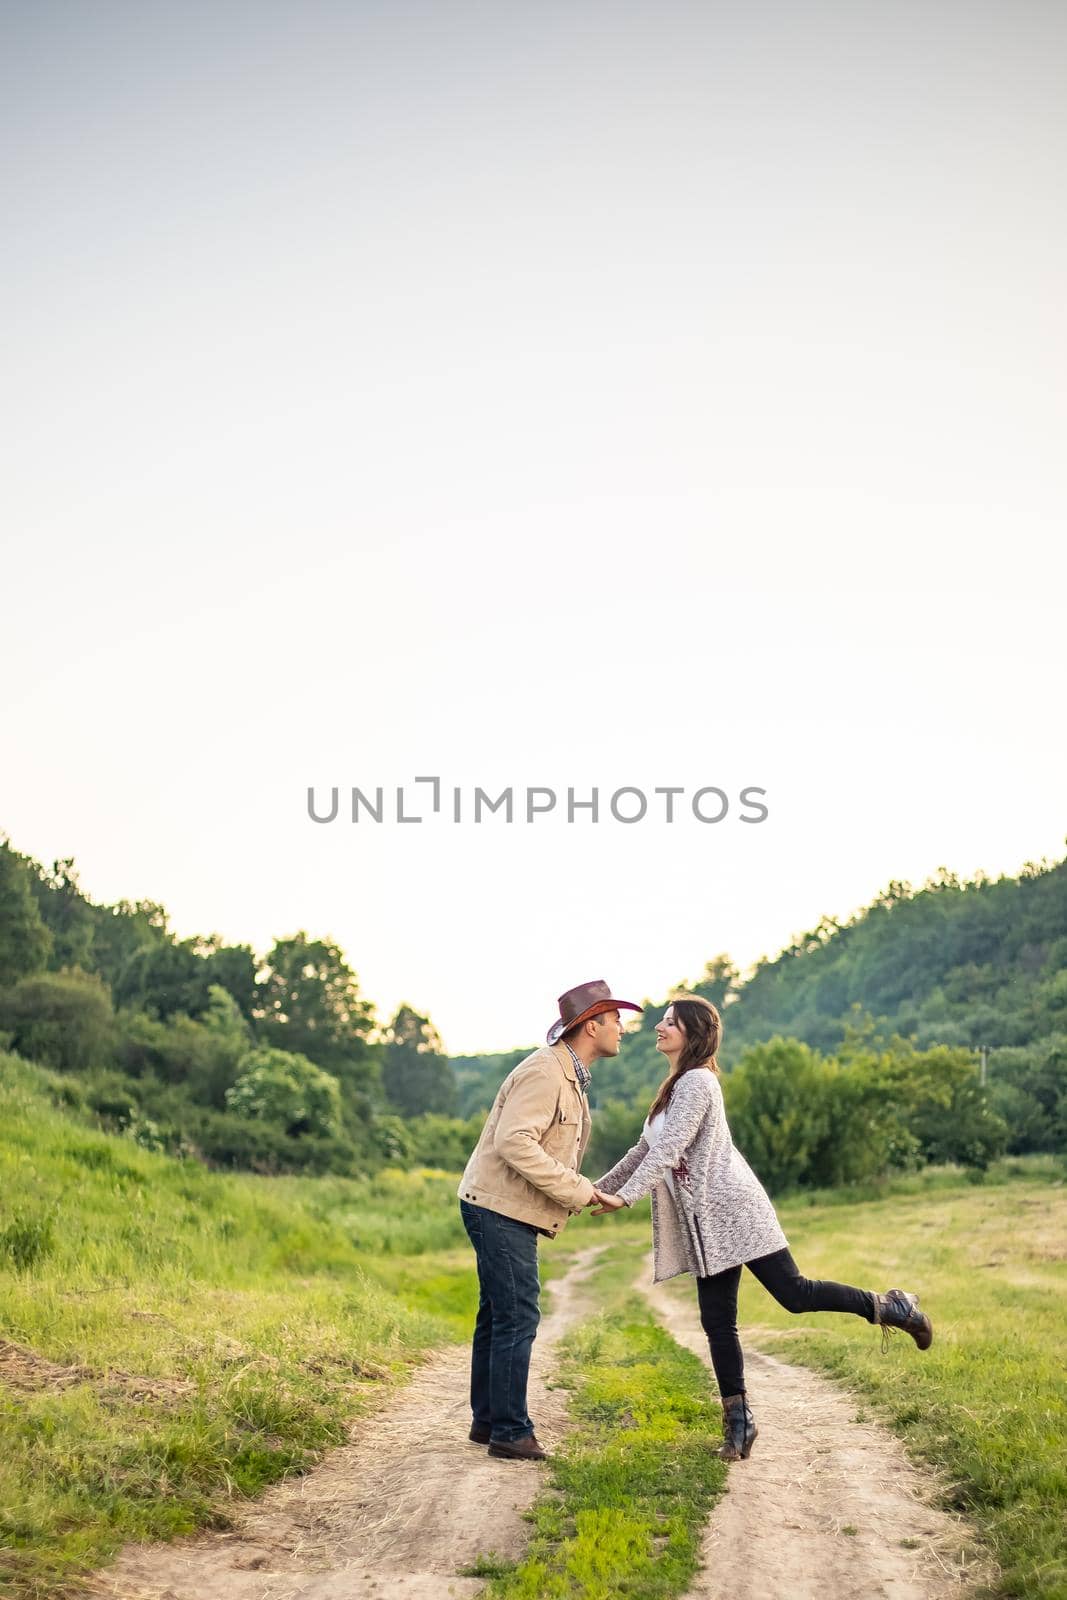 nice portrait of beautiful and young groom and bride outdoors